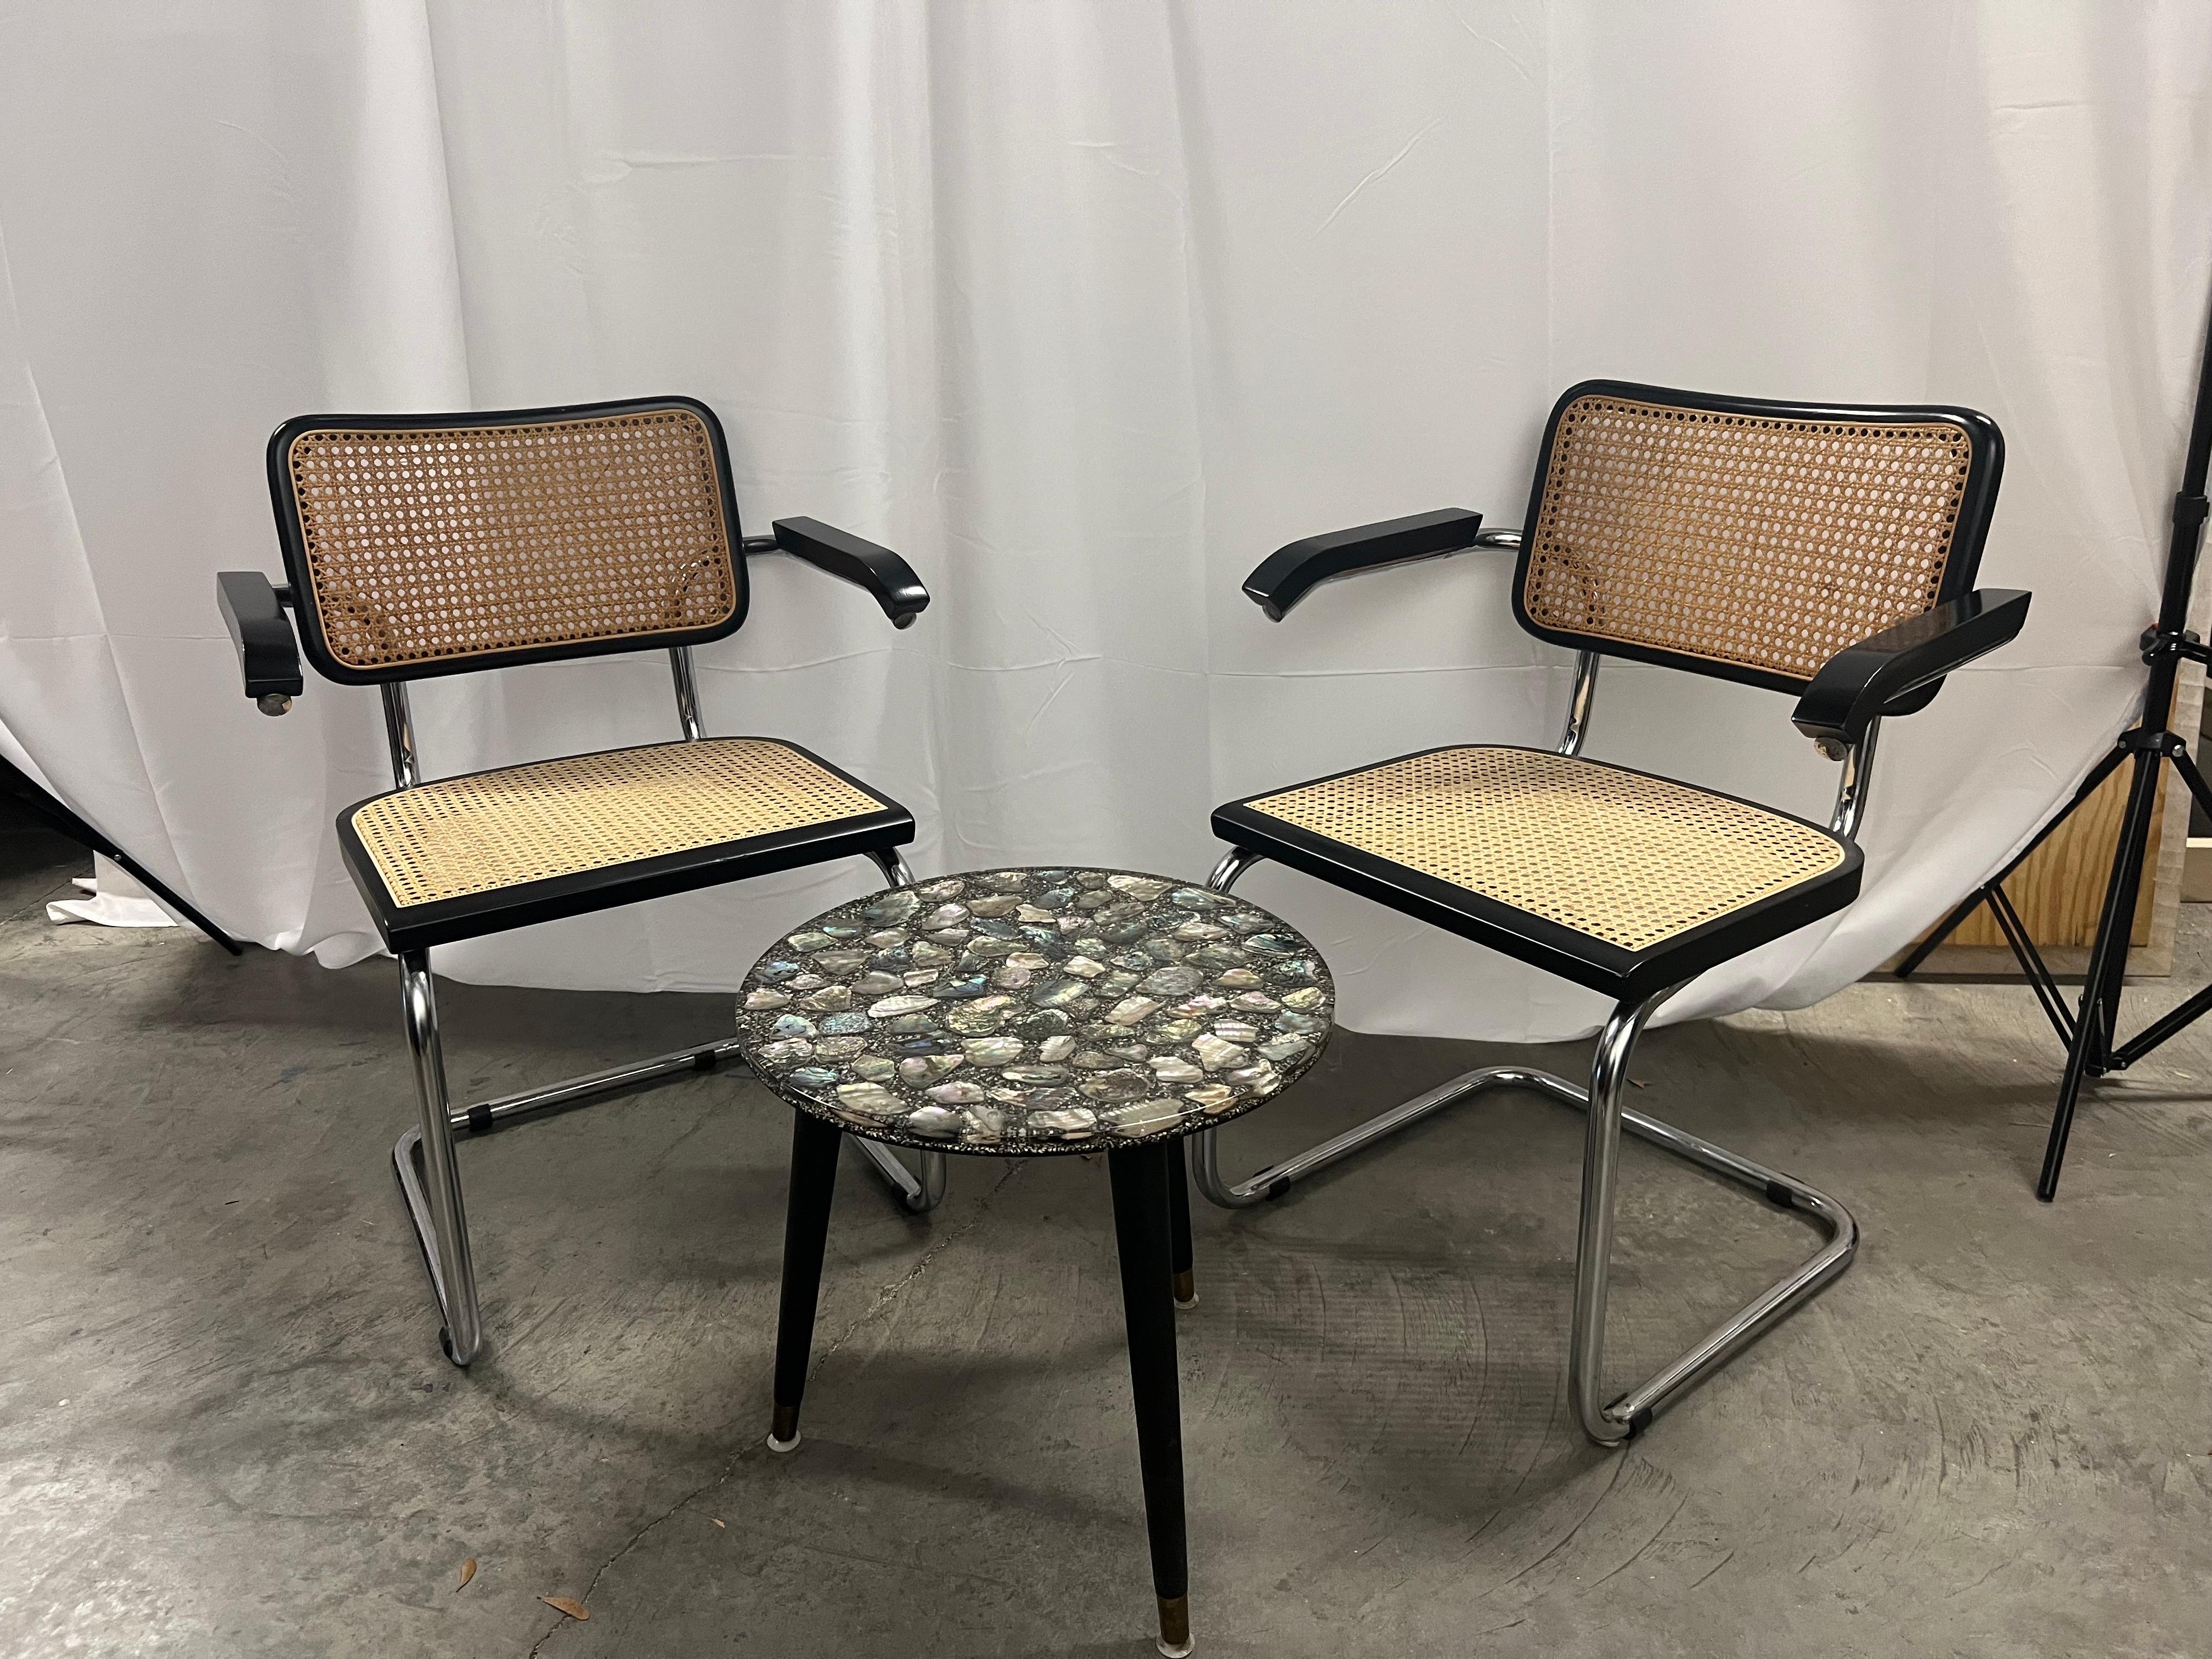 Italian deep brown & chrome Marcel Breuer cesca chair with arms,cane seat and back.  Please take note of the honey colored seat with the deep brown back.   I personally love the contrast and all the caning is original.  Please see our other listings